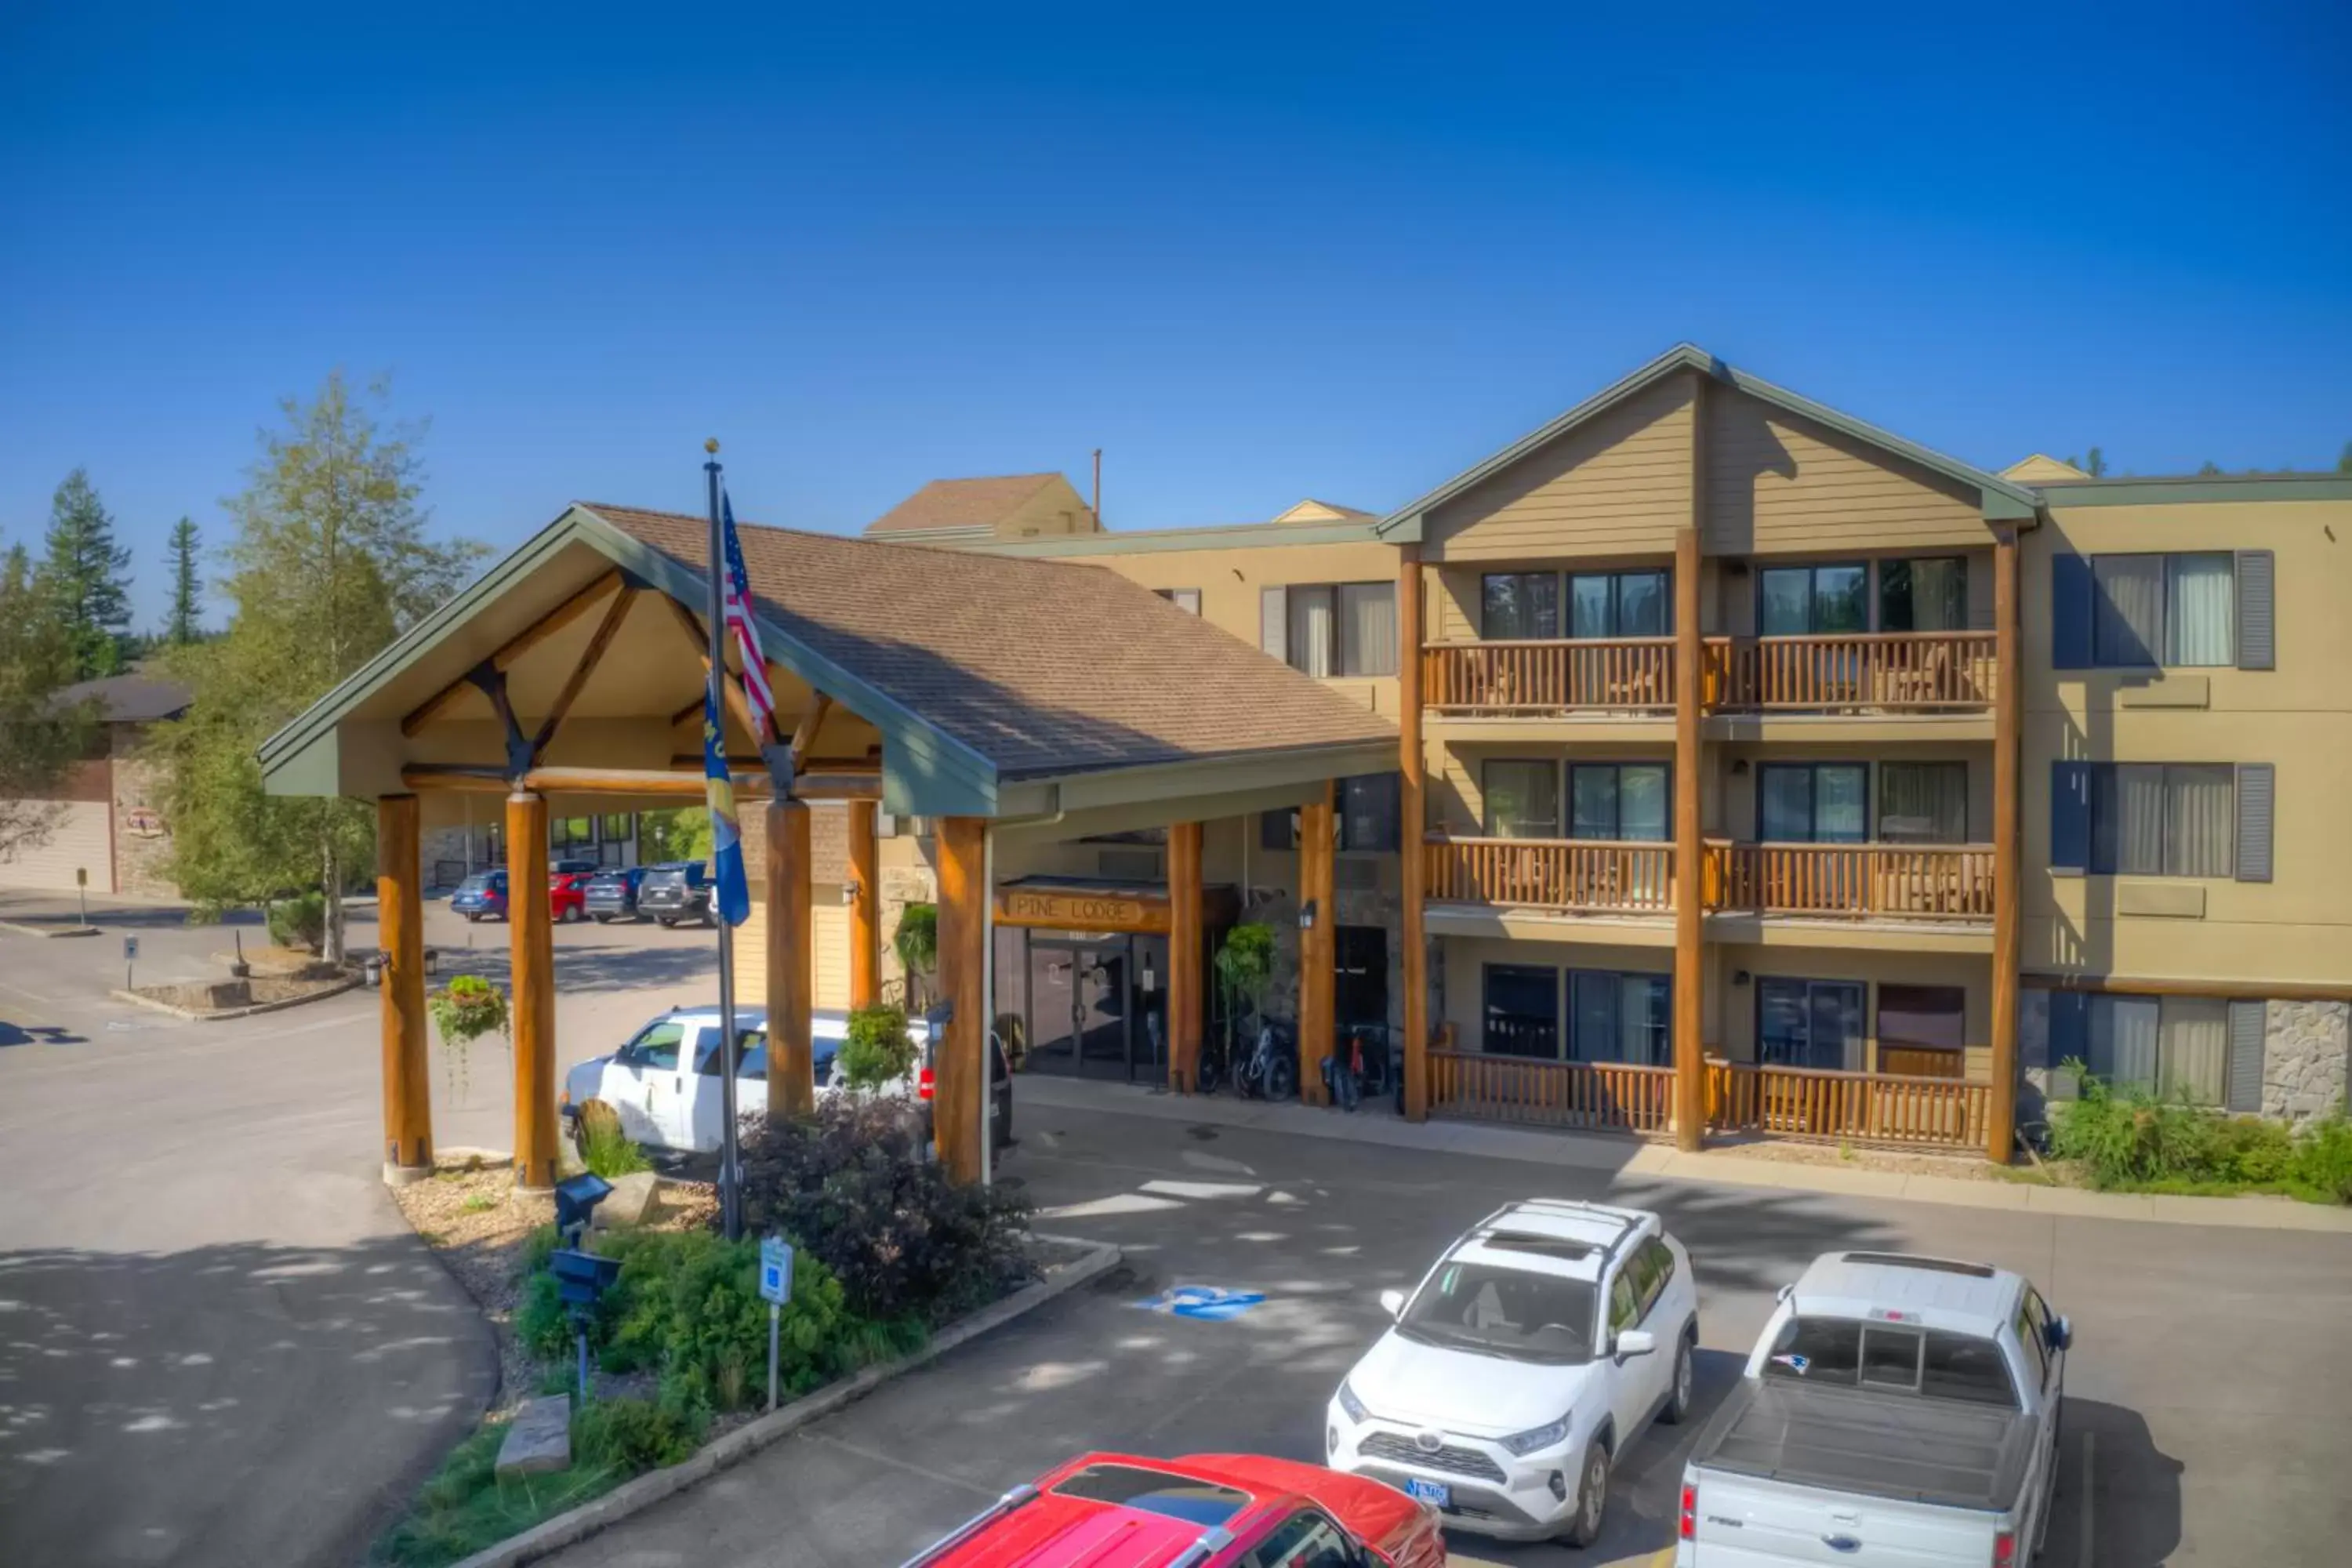 Property building in The Pine Lodge on Whitefish River, Ascend Hotel Collection